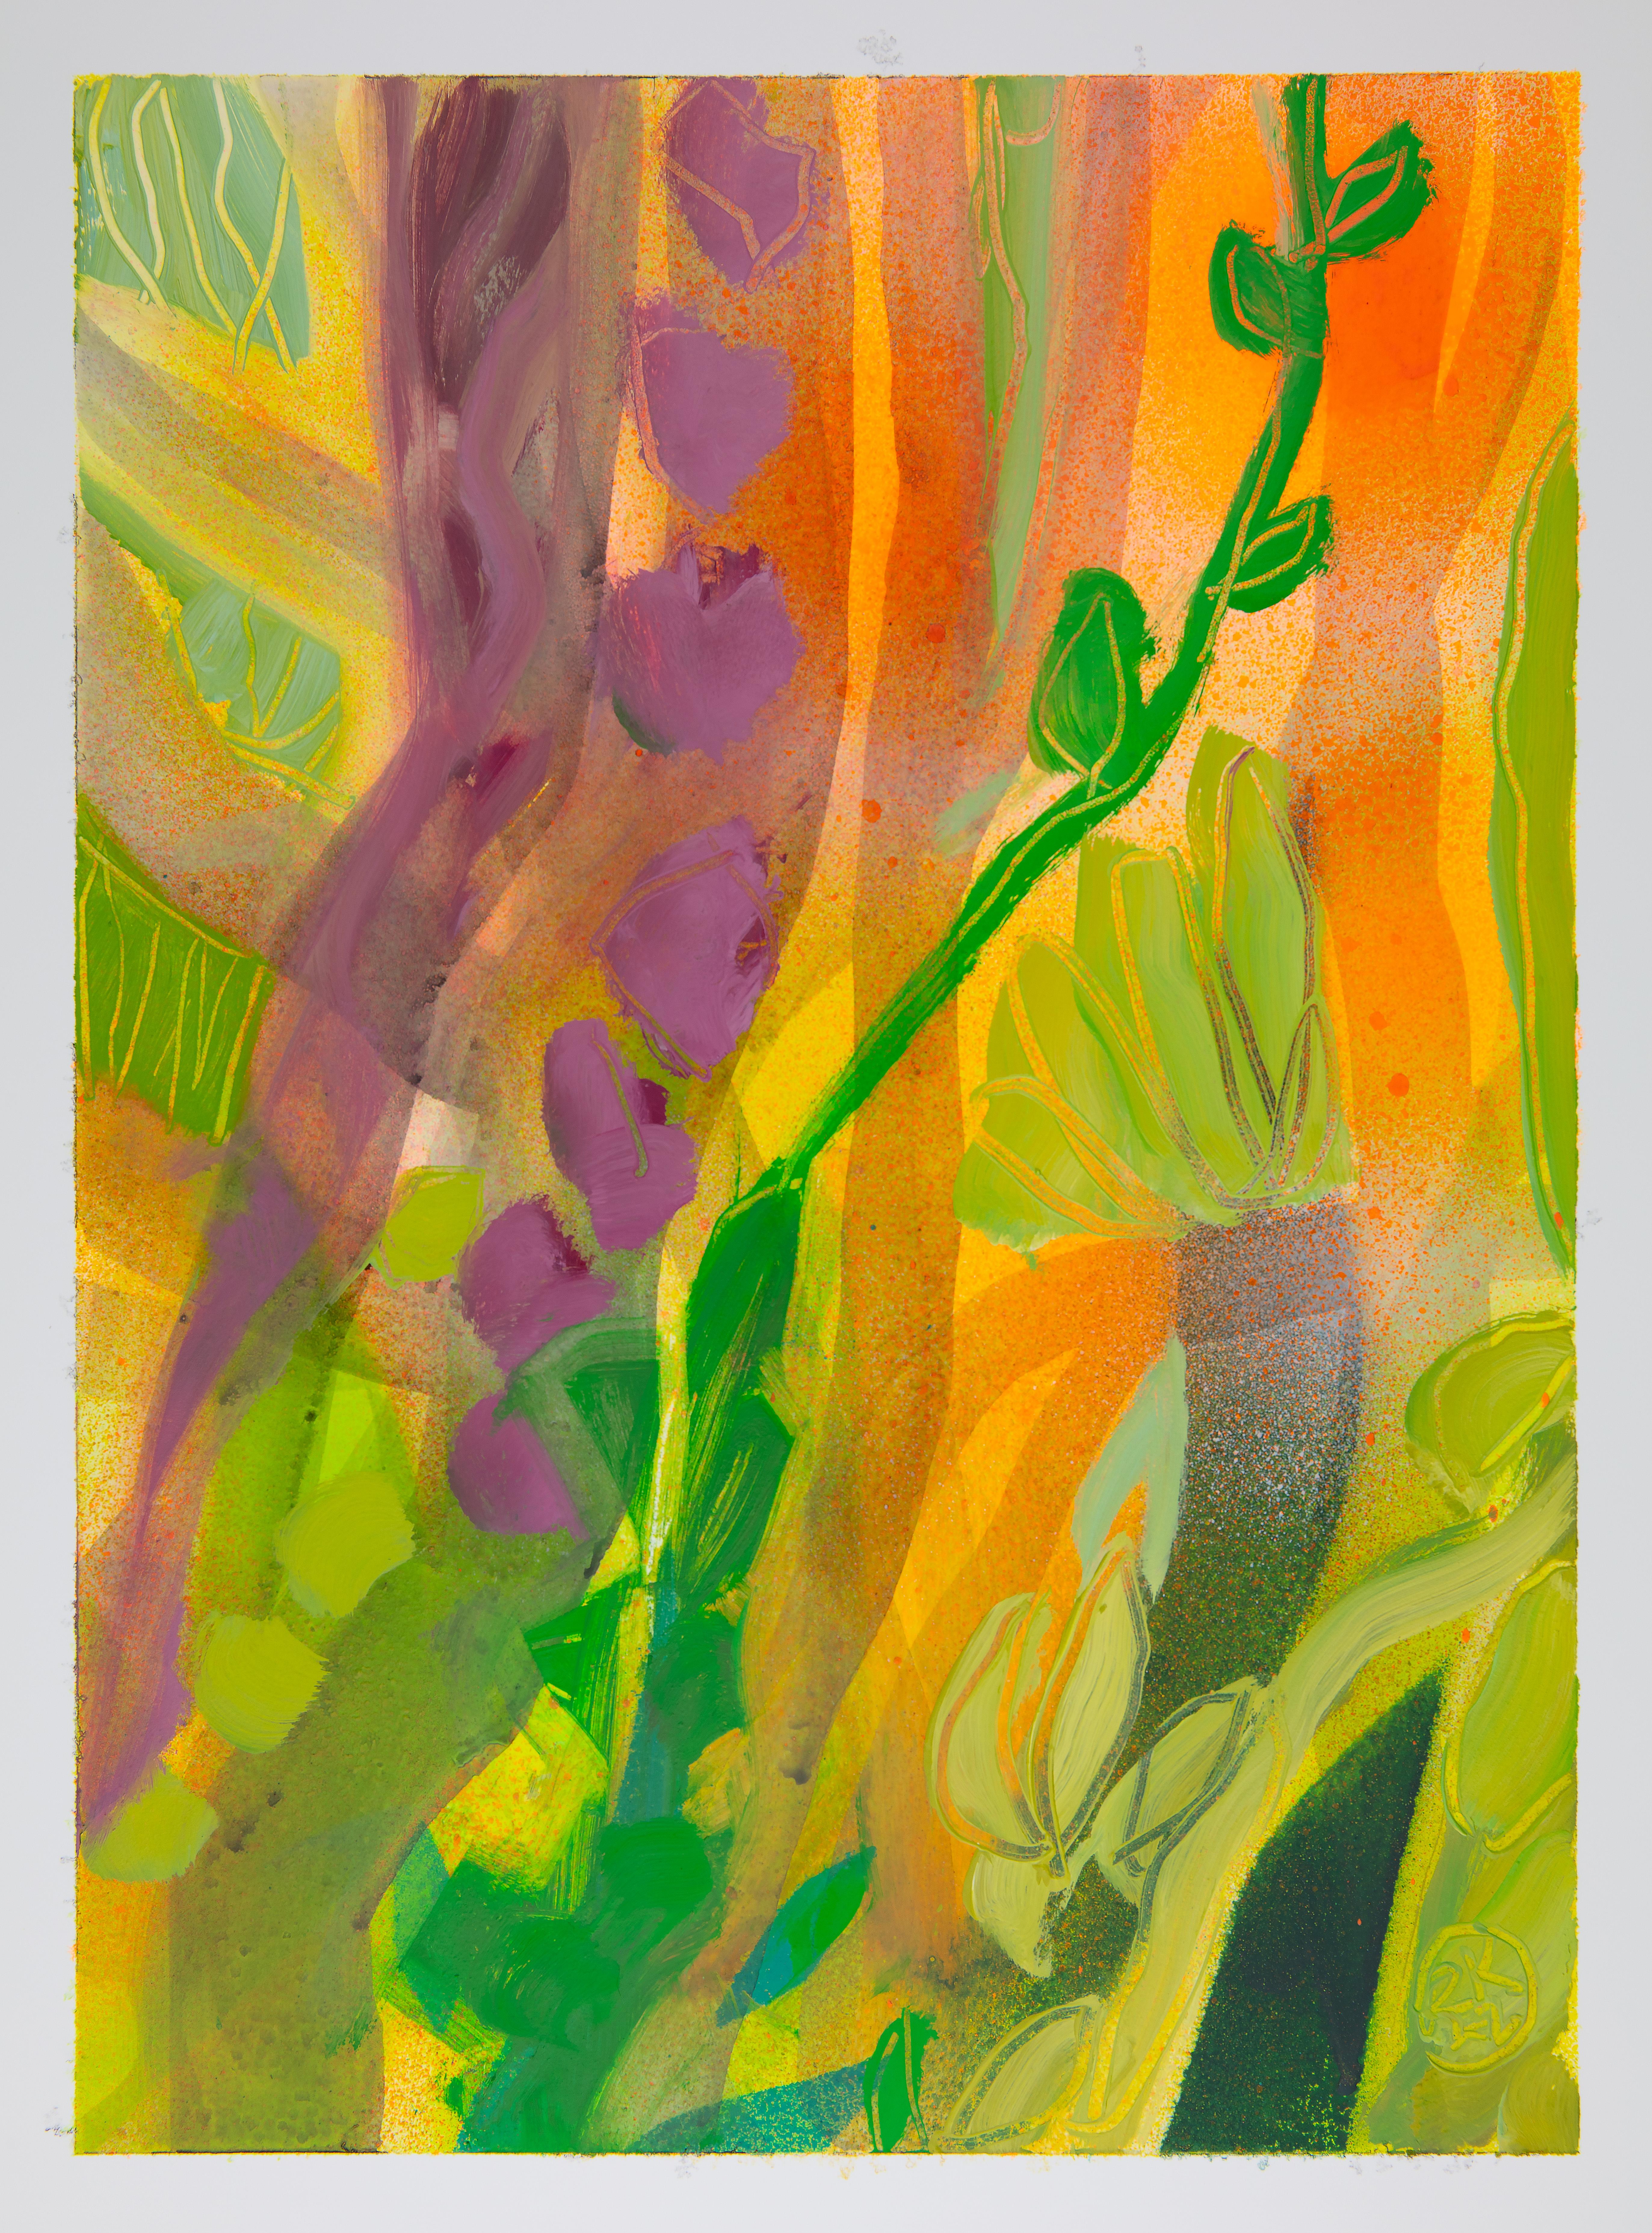 Botanical I, bright green and orange abstract plants, surreal scene